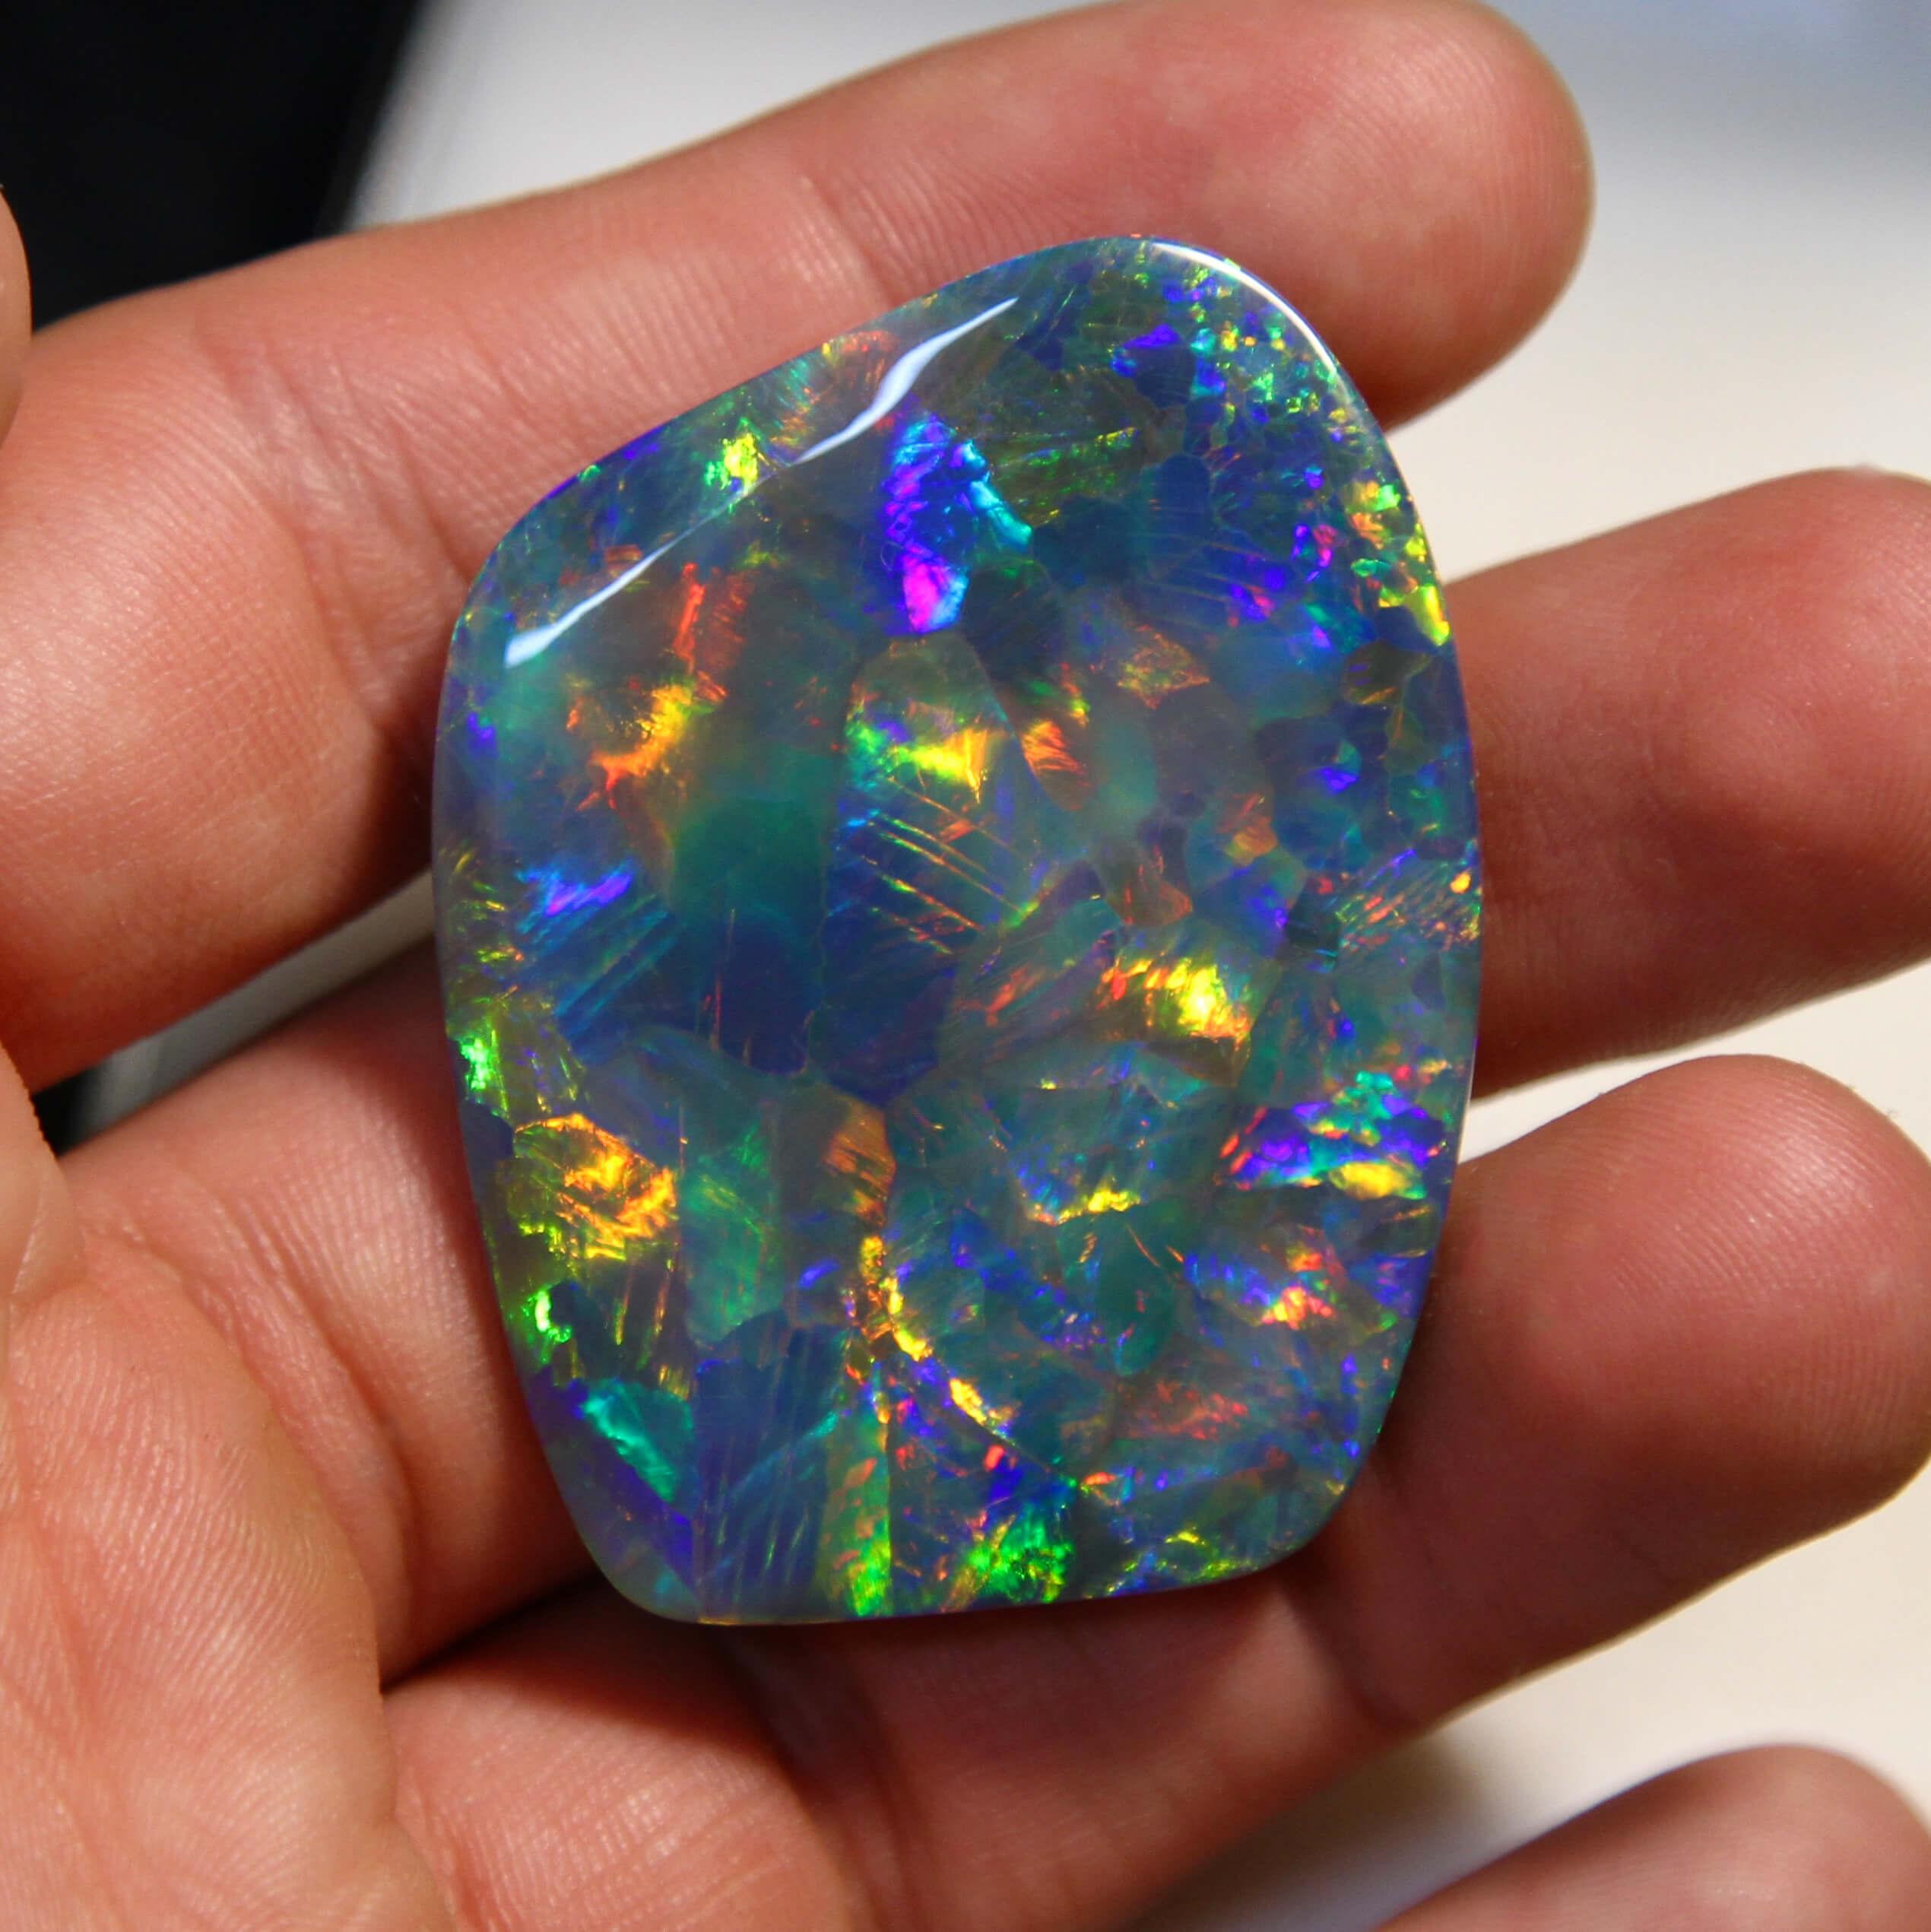 This gem opal is an extremely rare South Australian black opal. Rivalling the quality and colour intensity of the best black opals ever mined, this gem is a museum-grade opal. Almost 100cts of solid natural black opal displaying the full spectrum of